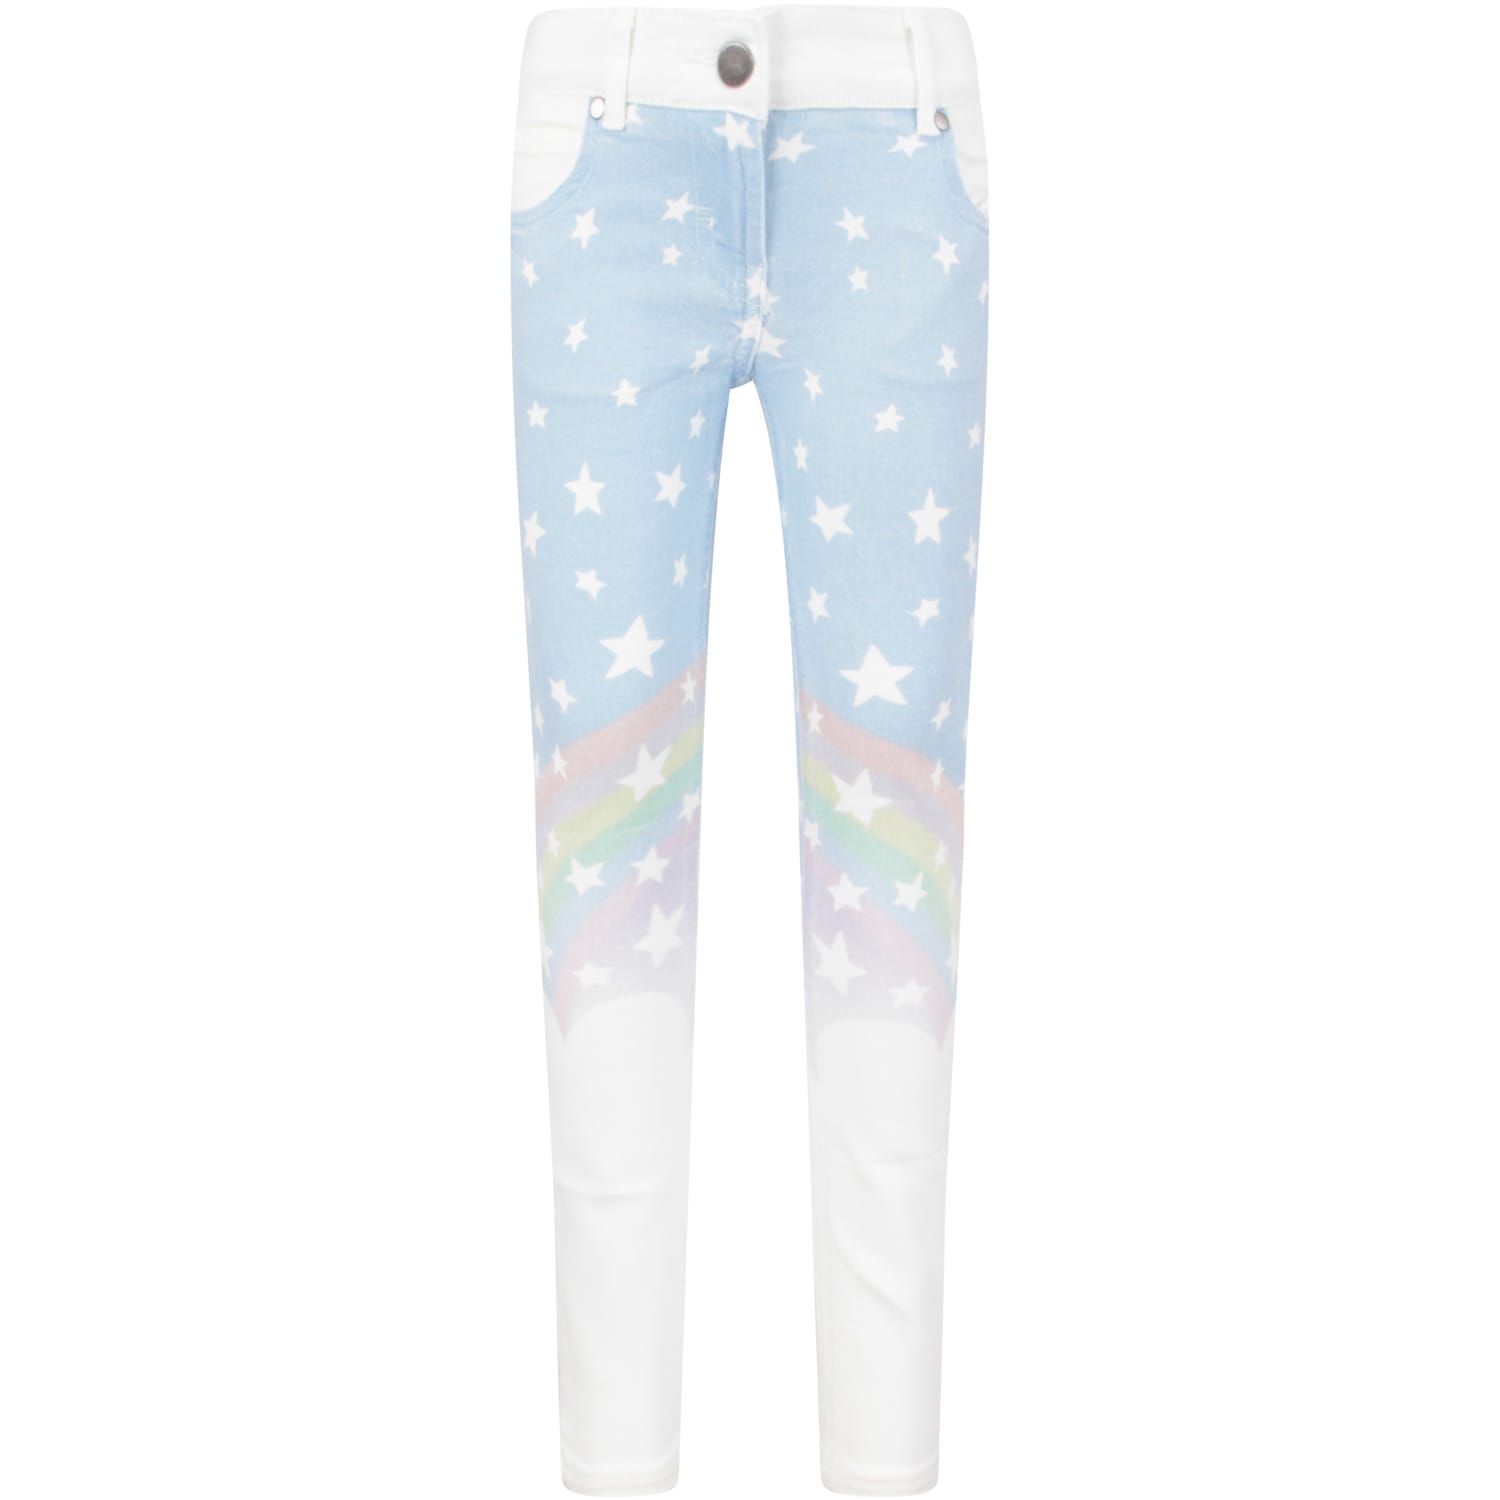 Stella McCartney Kids White And Light Blue Jeans For Girl With White Stars